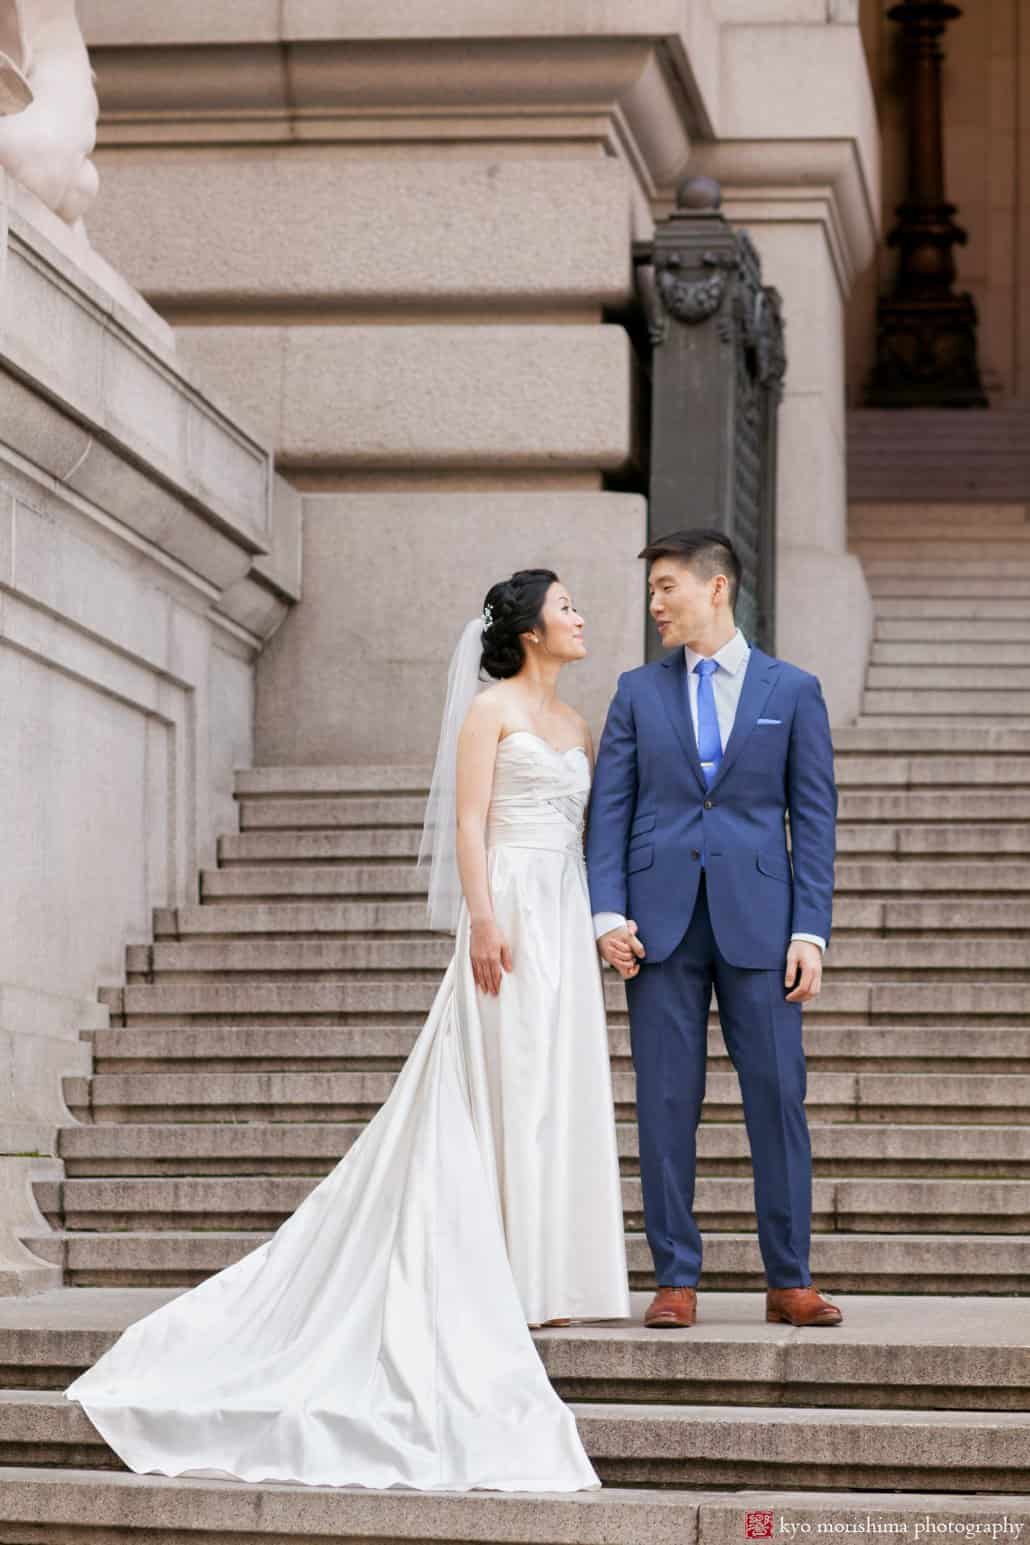 National Museum of the American Indian wedding photo on the front steps, photographed by Kyo Morishima